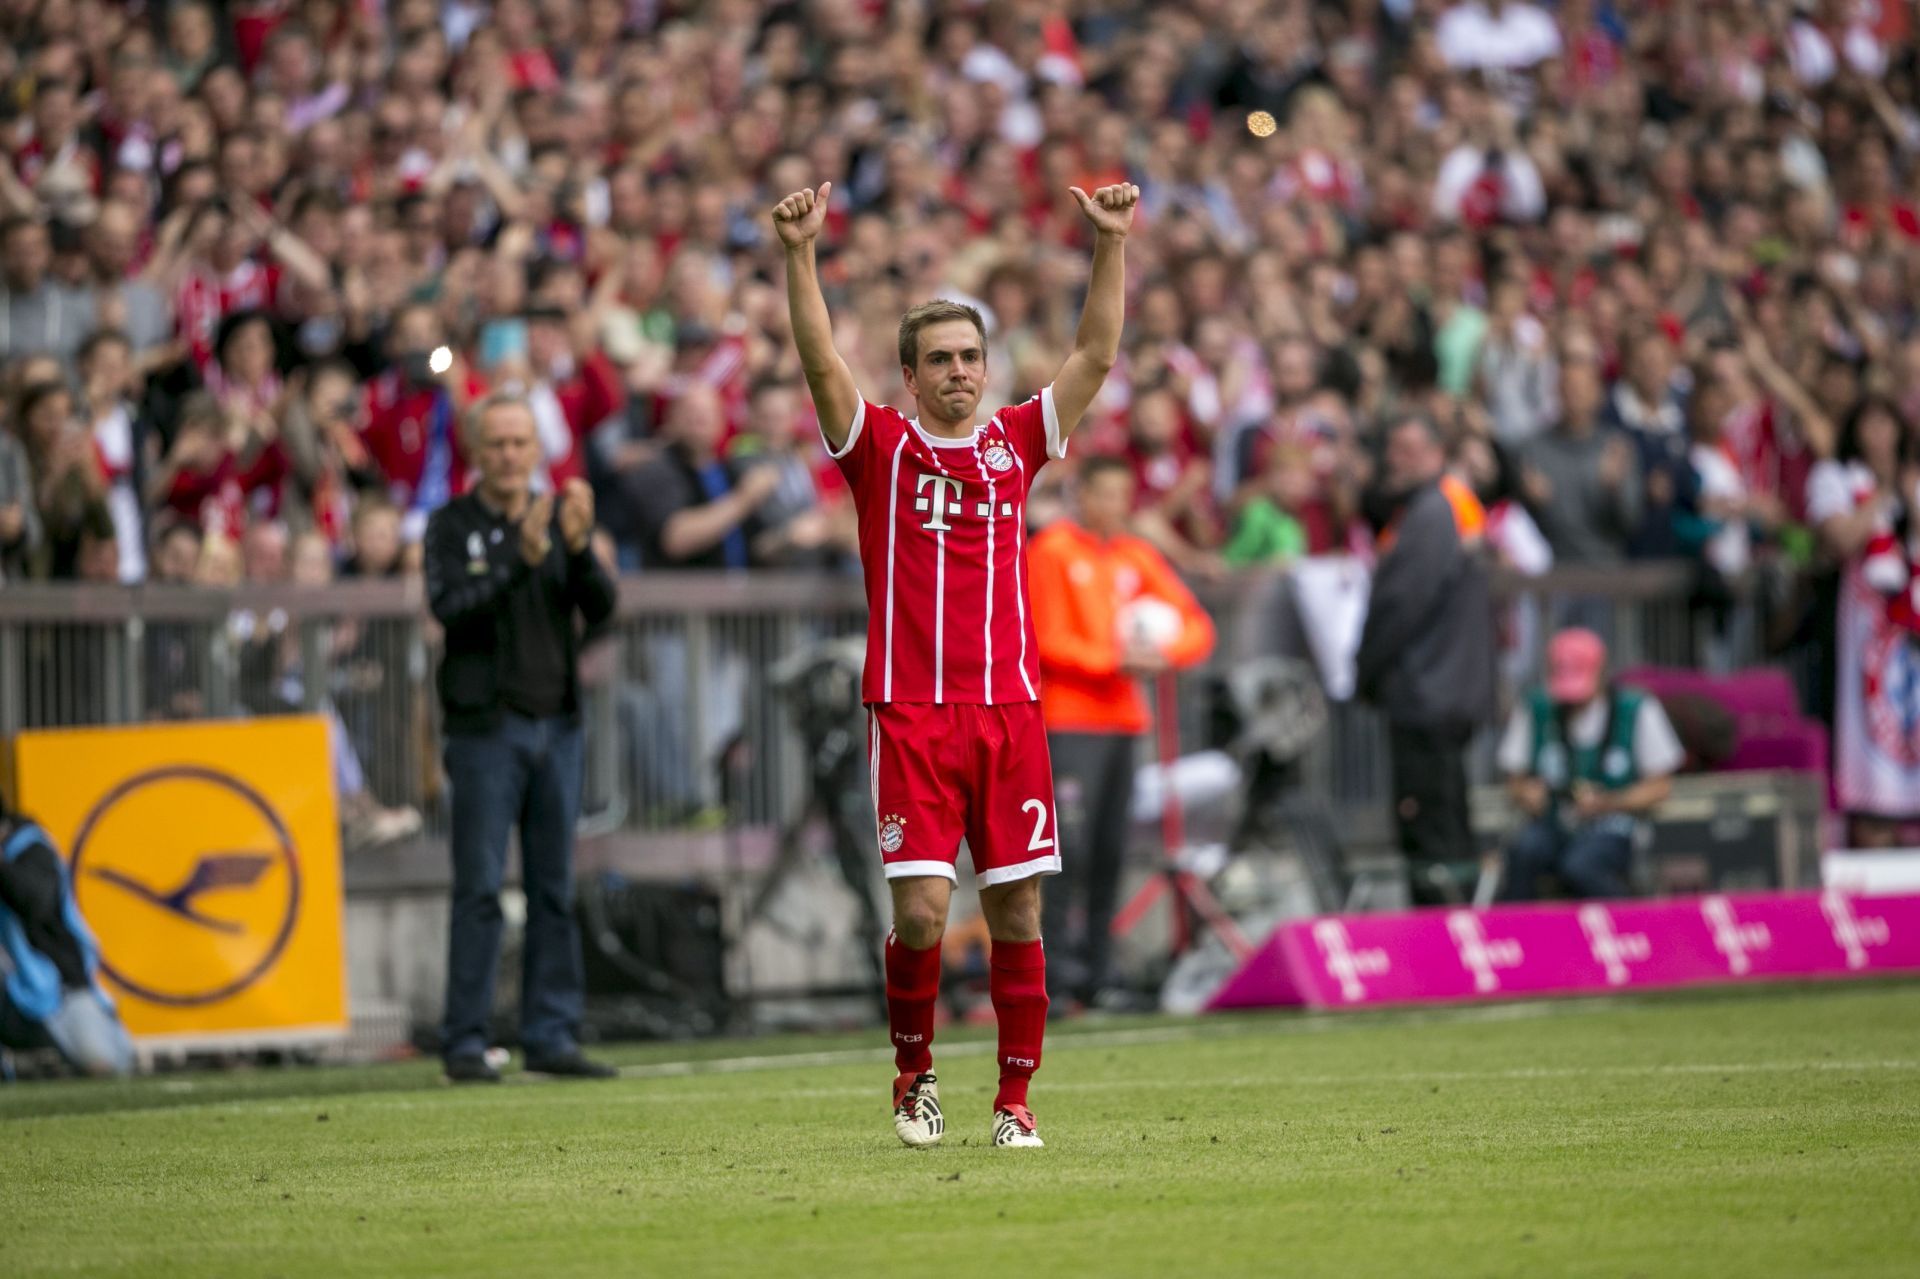 Lahm is a Bayern Munich Hall of Fame inductee